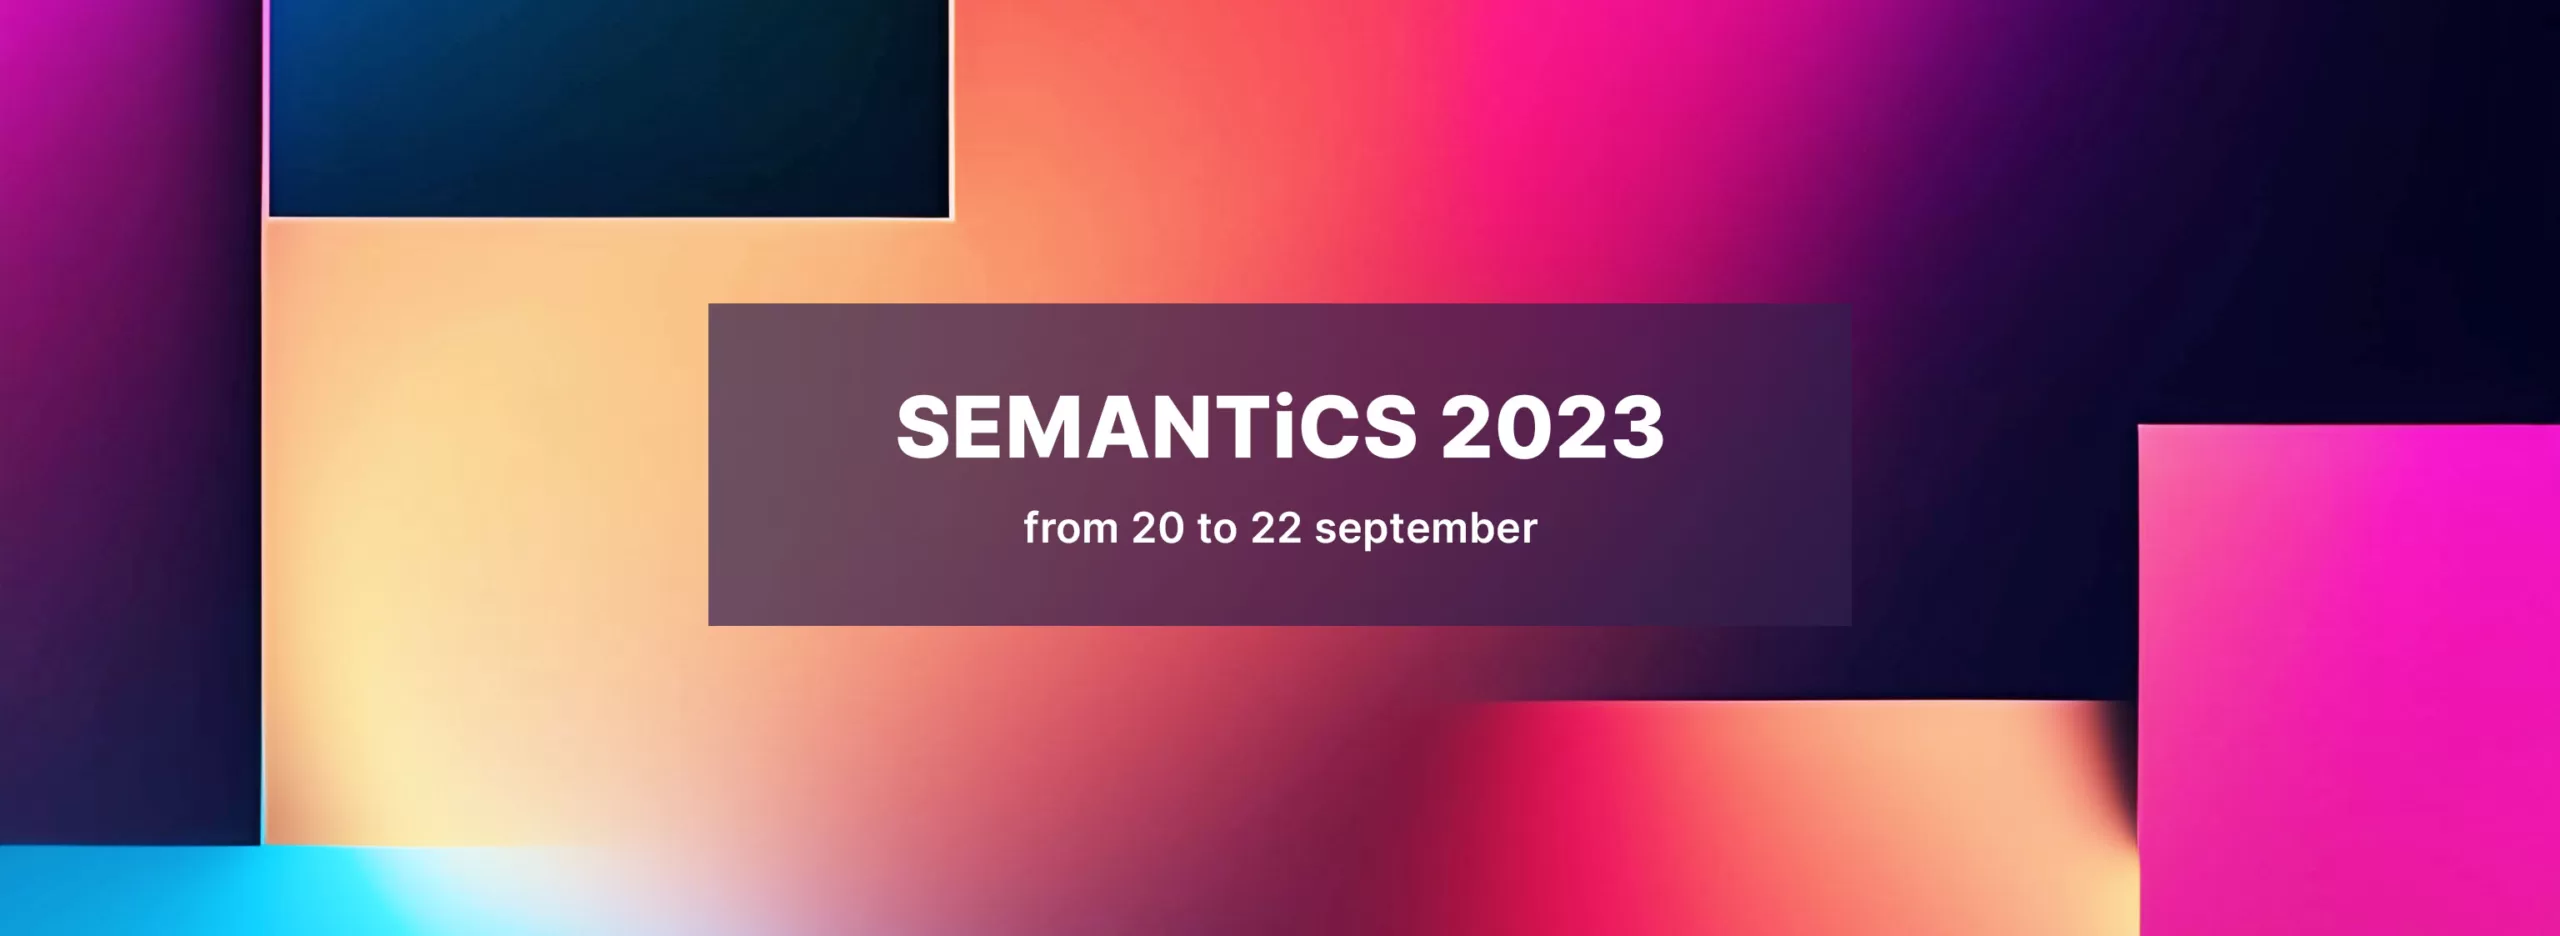 decorative banner with a colored background, a purple square containing a white title SEMANTiCS 2023, from 20 to 22 september